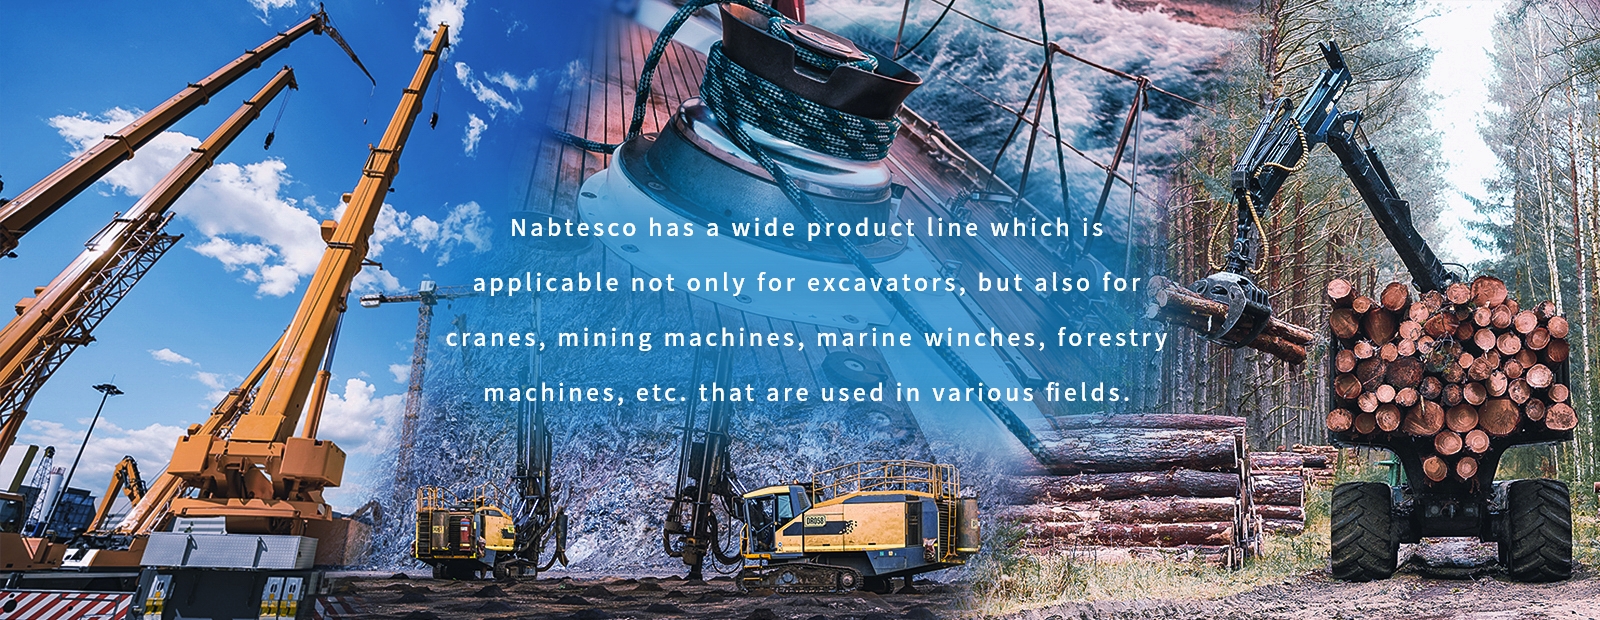 Nabtesco has a wide product line which isapplicable not only for excavators, but also for cranes, mining machines, marine winches,forestry machines, etc. that are used in variousfields.